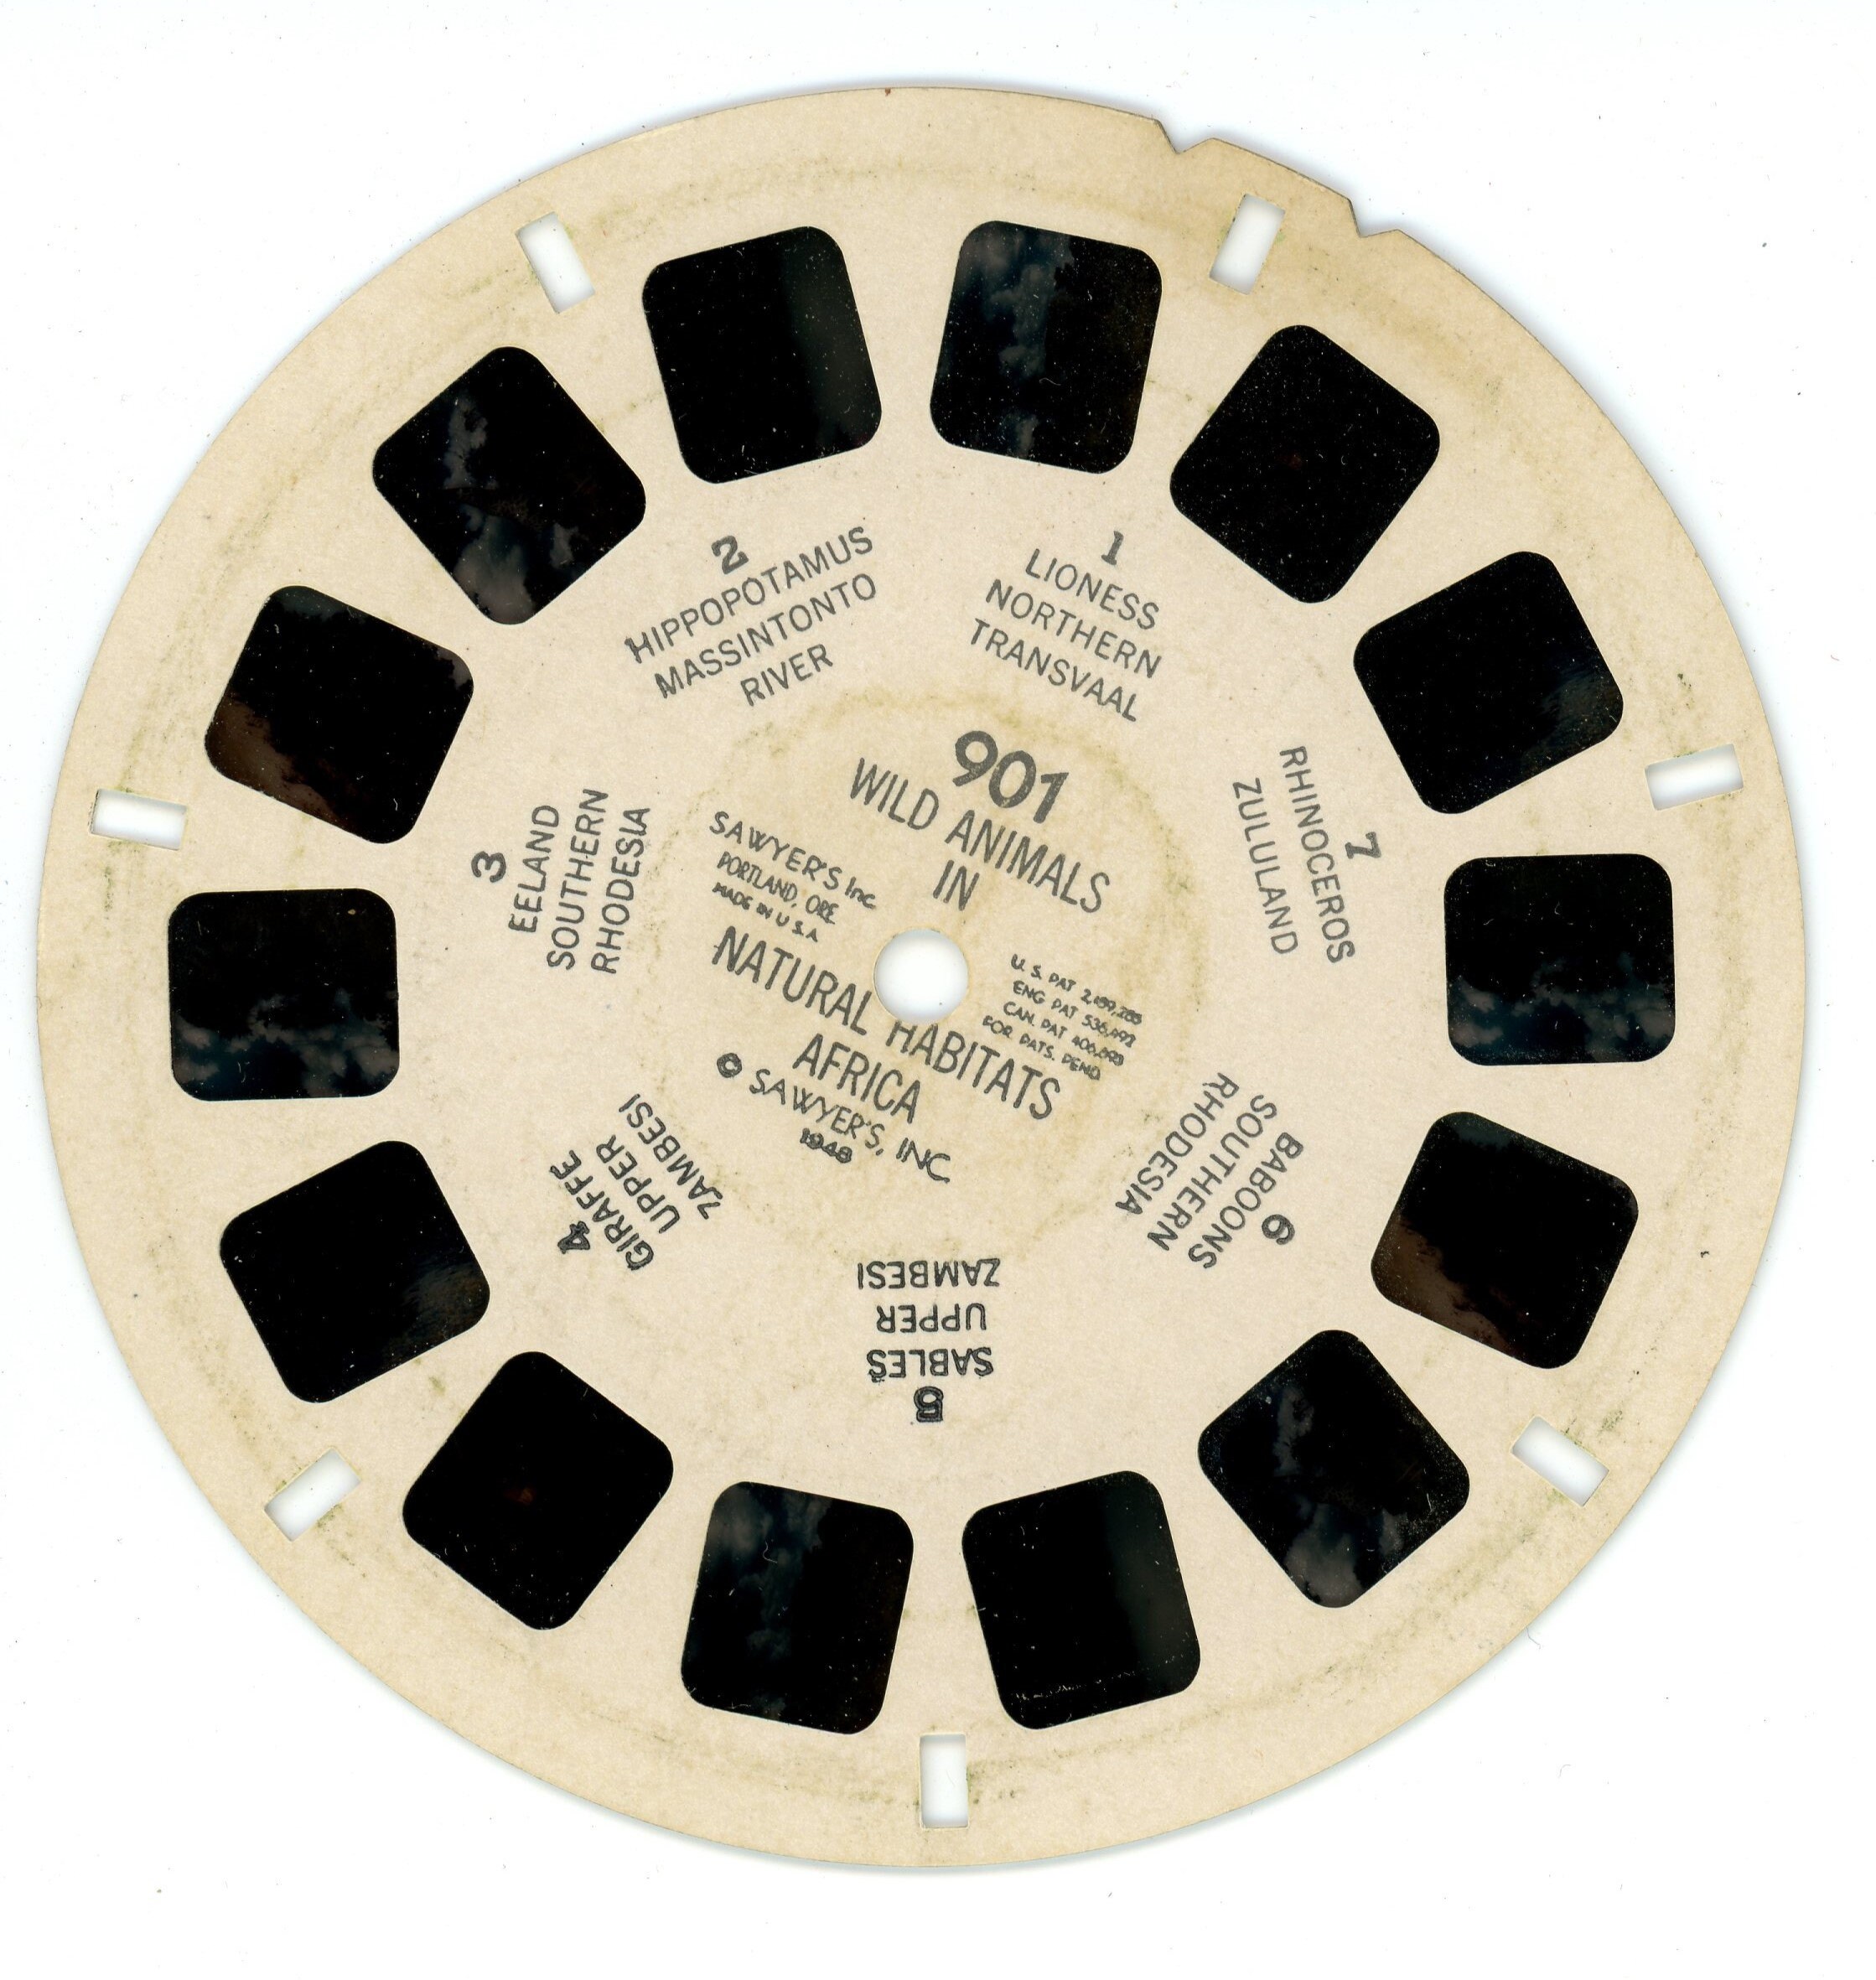 THE ANIMAL WORLD VIEWMASTER REELS